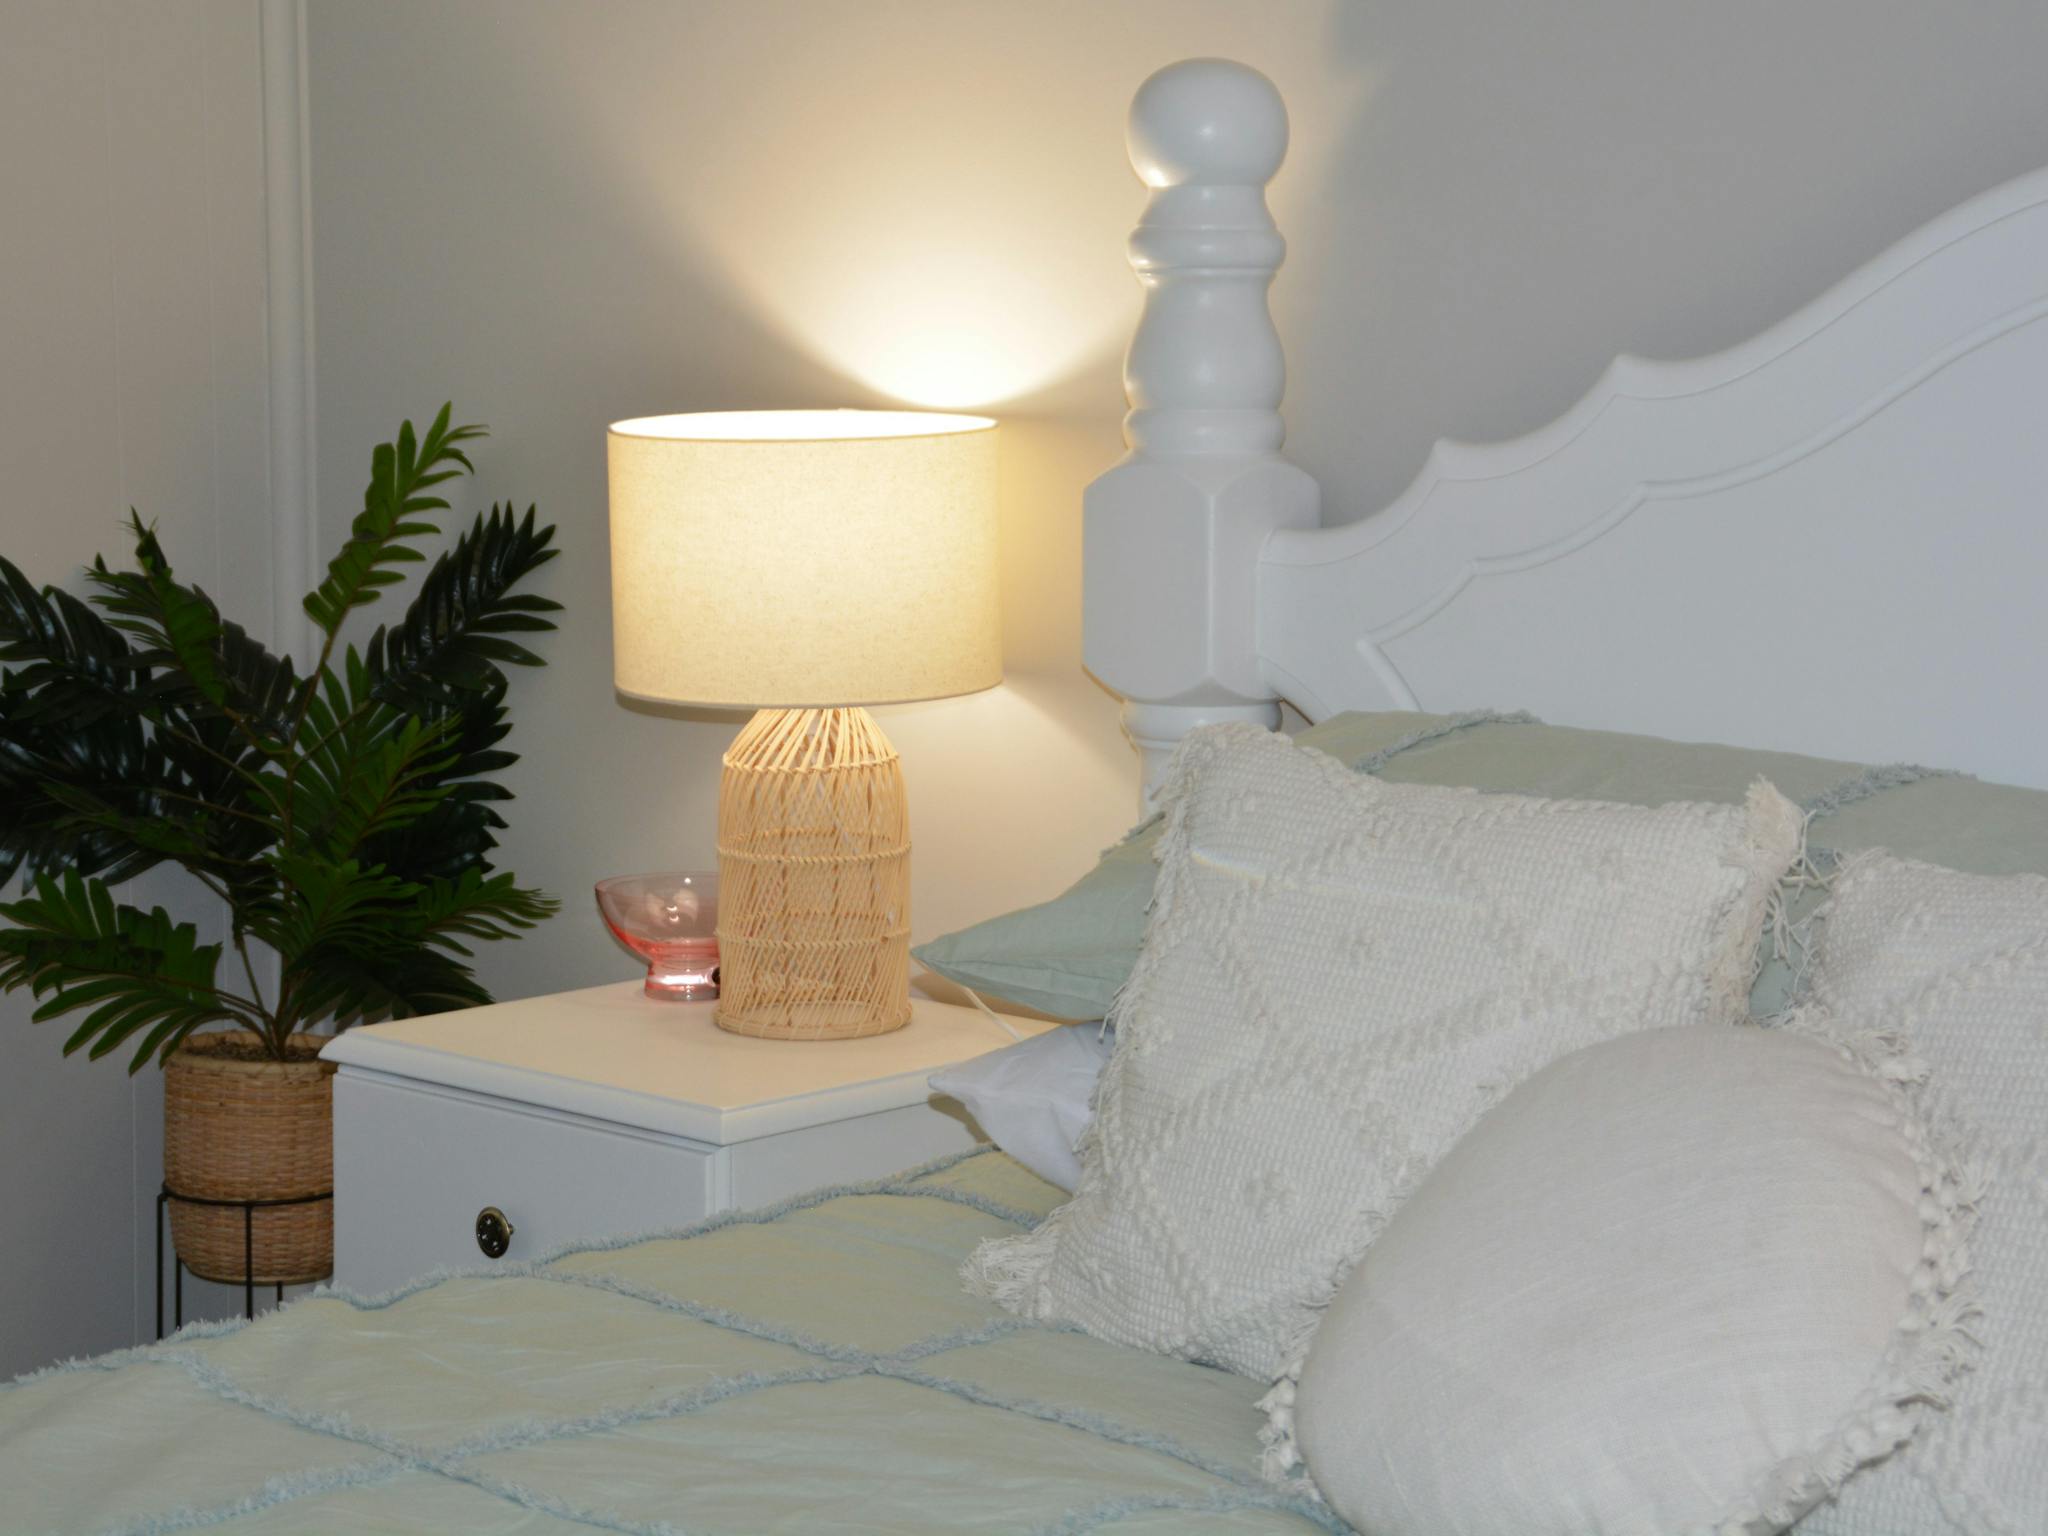 Queen size bed, lamp, plant